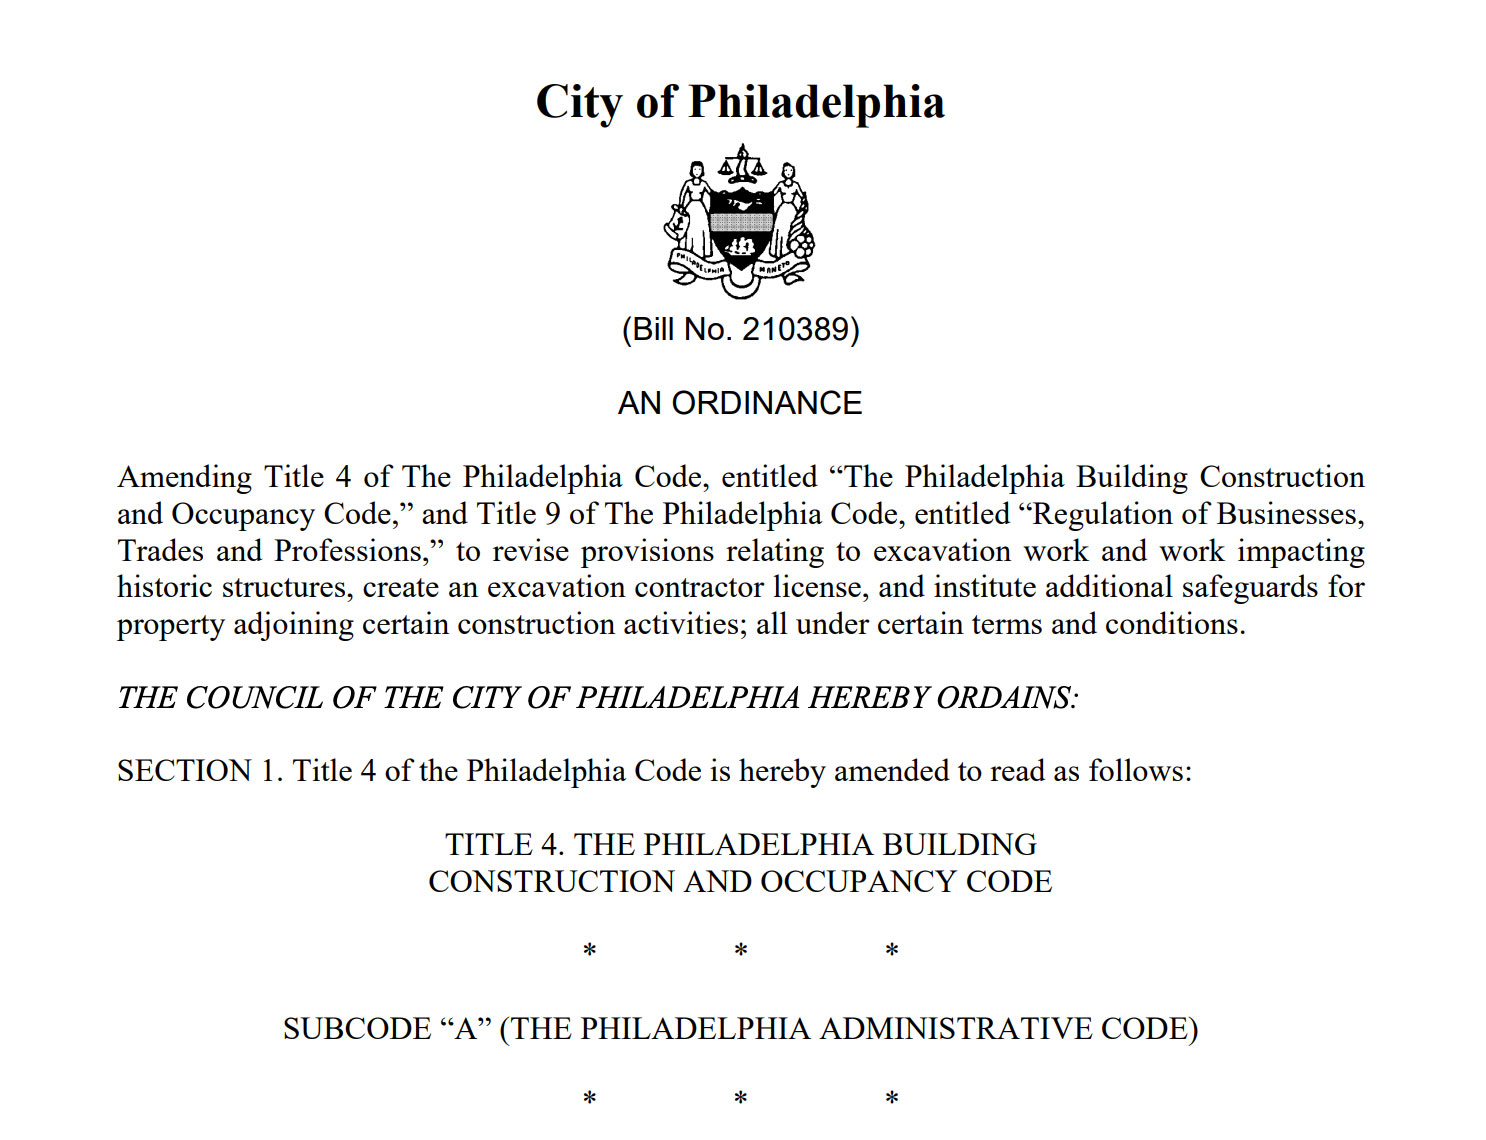 Bill #210389 Adds New Regulations for Excavation Work in the City